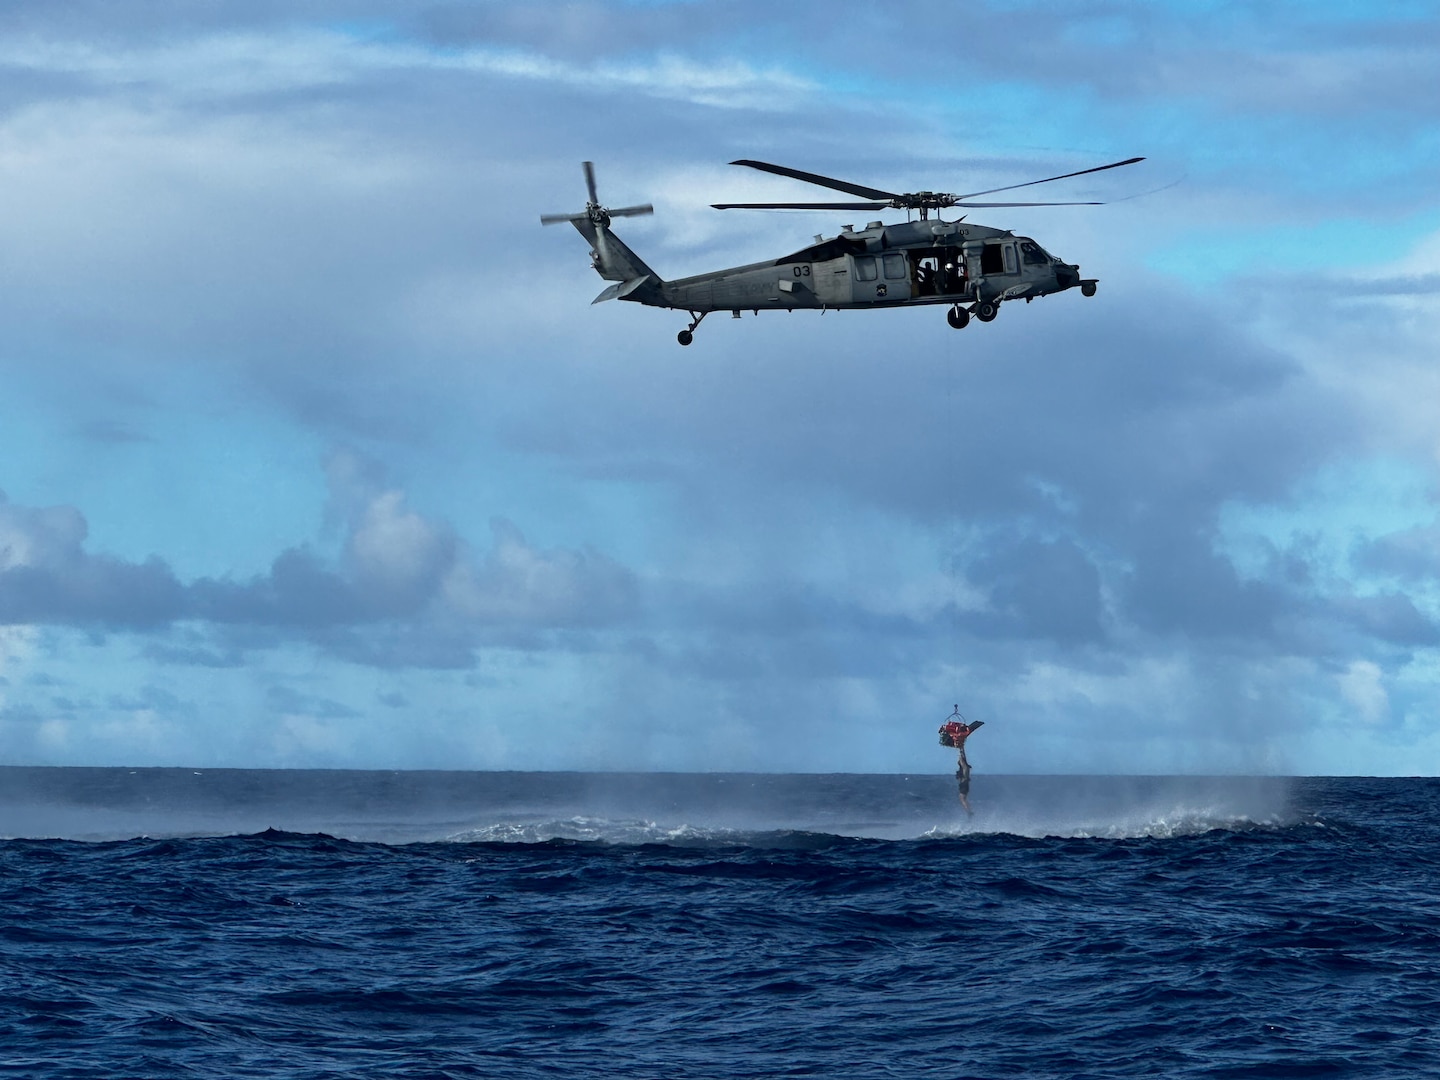 Following search patterns designed by the U.S. Coast Guard Forces Micronesia/Sector Guam Joint Rescue Sub-Center team, U.S. Navy Helicopter Sea Combat Squadron Two-Five personnel, using an MH-60 Knighthawk helicopter, located the three divers a few miles from their original location  off Santa Rosa Banks off Guam at about 3:45 p.m. on Oct. 28, 2023, and performed a successful hoist operation, ensuring their safe rescue. U.S. Coast Guard Station Apra Harbor using a 45-foot Response Boat-Medium also responded. (U.S. Coast Guard photo by Petty Officer 2nd Class Menet)